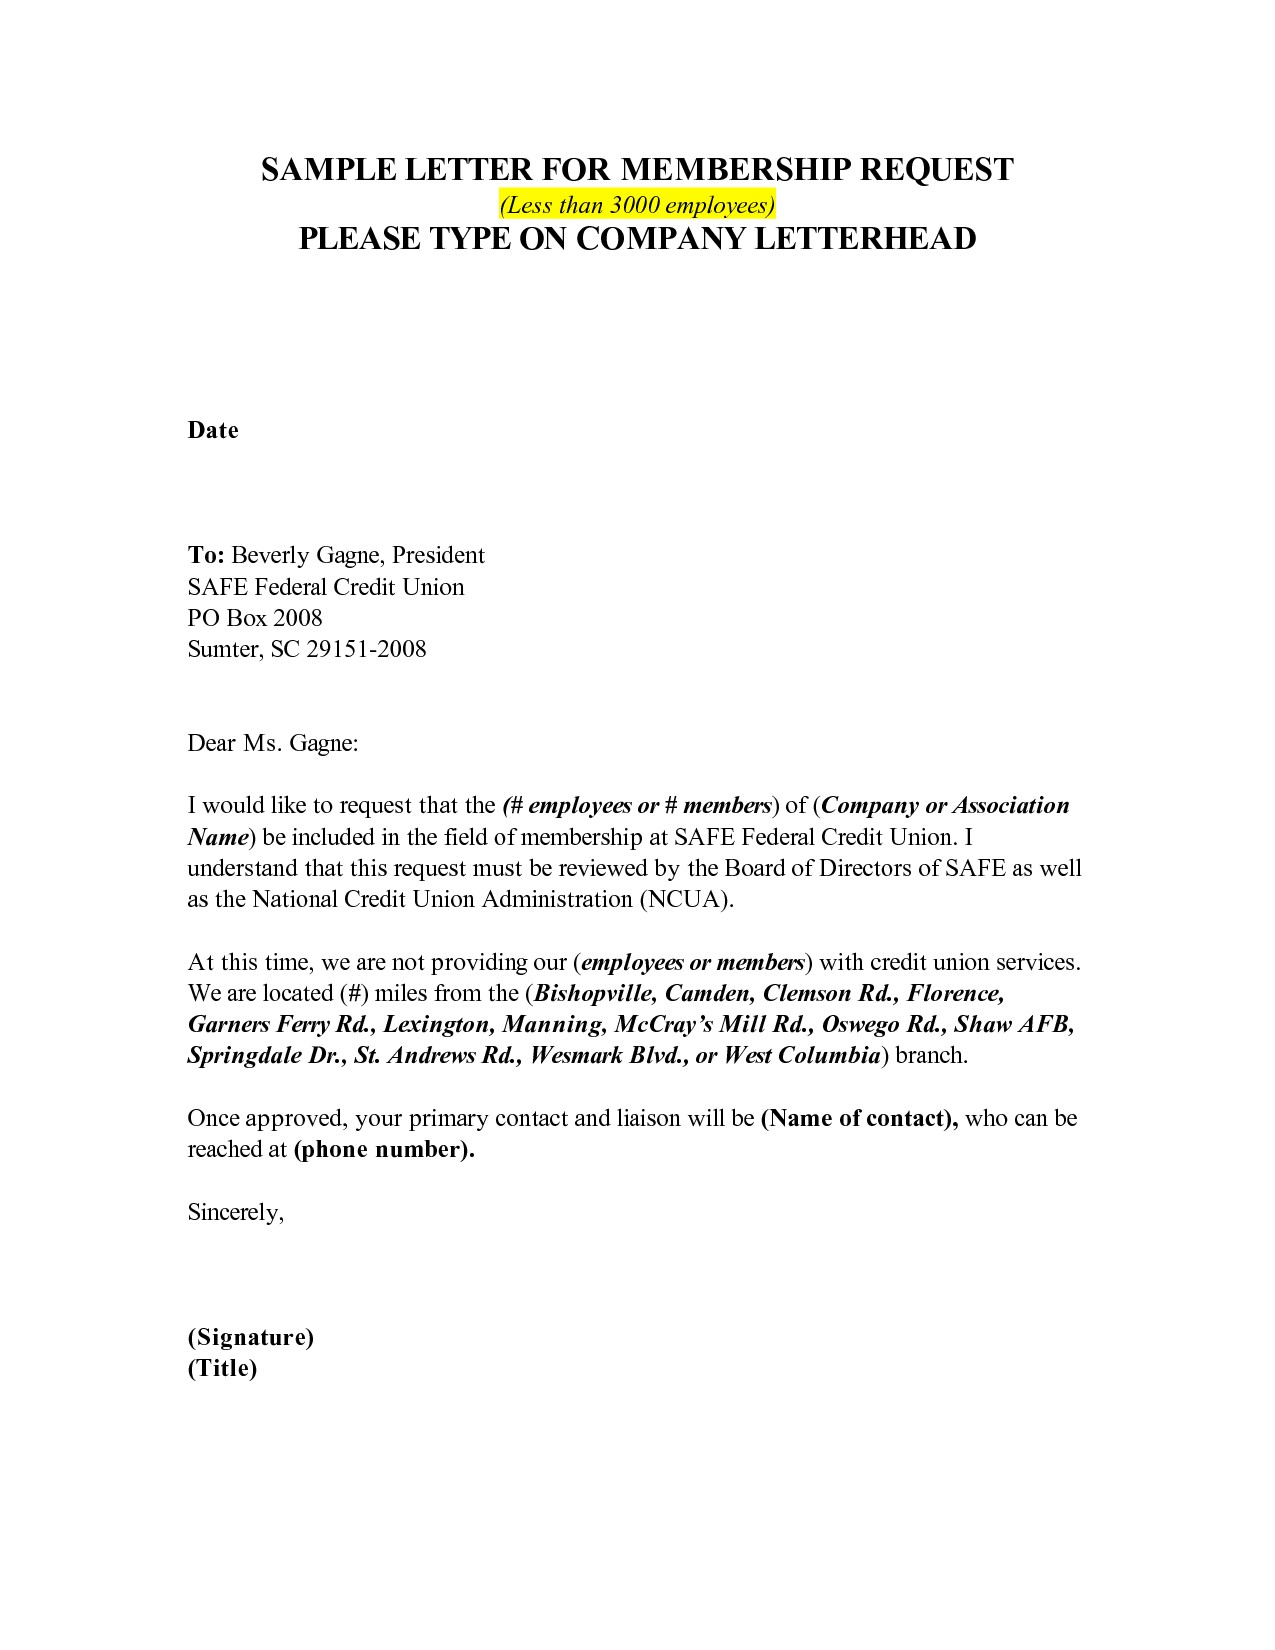 Contract Cancellation Letter Template Free - Gym Membership Cancellation Letter Sample Best 9 Cancel Gym